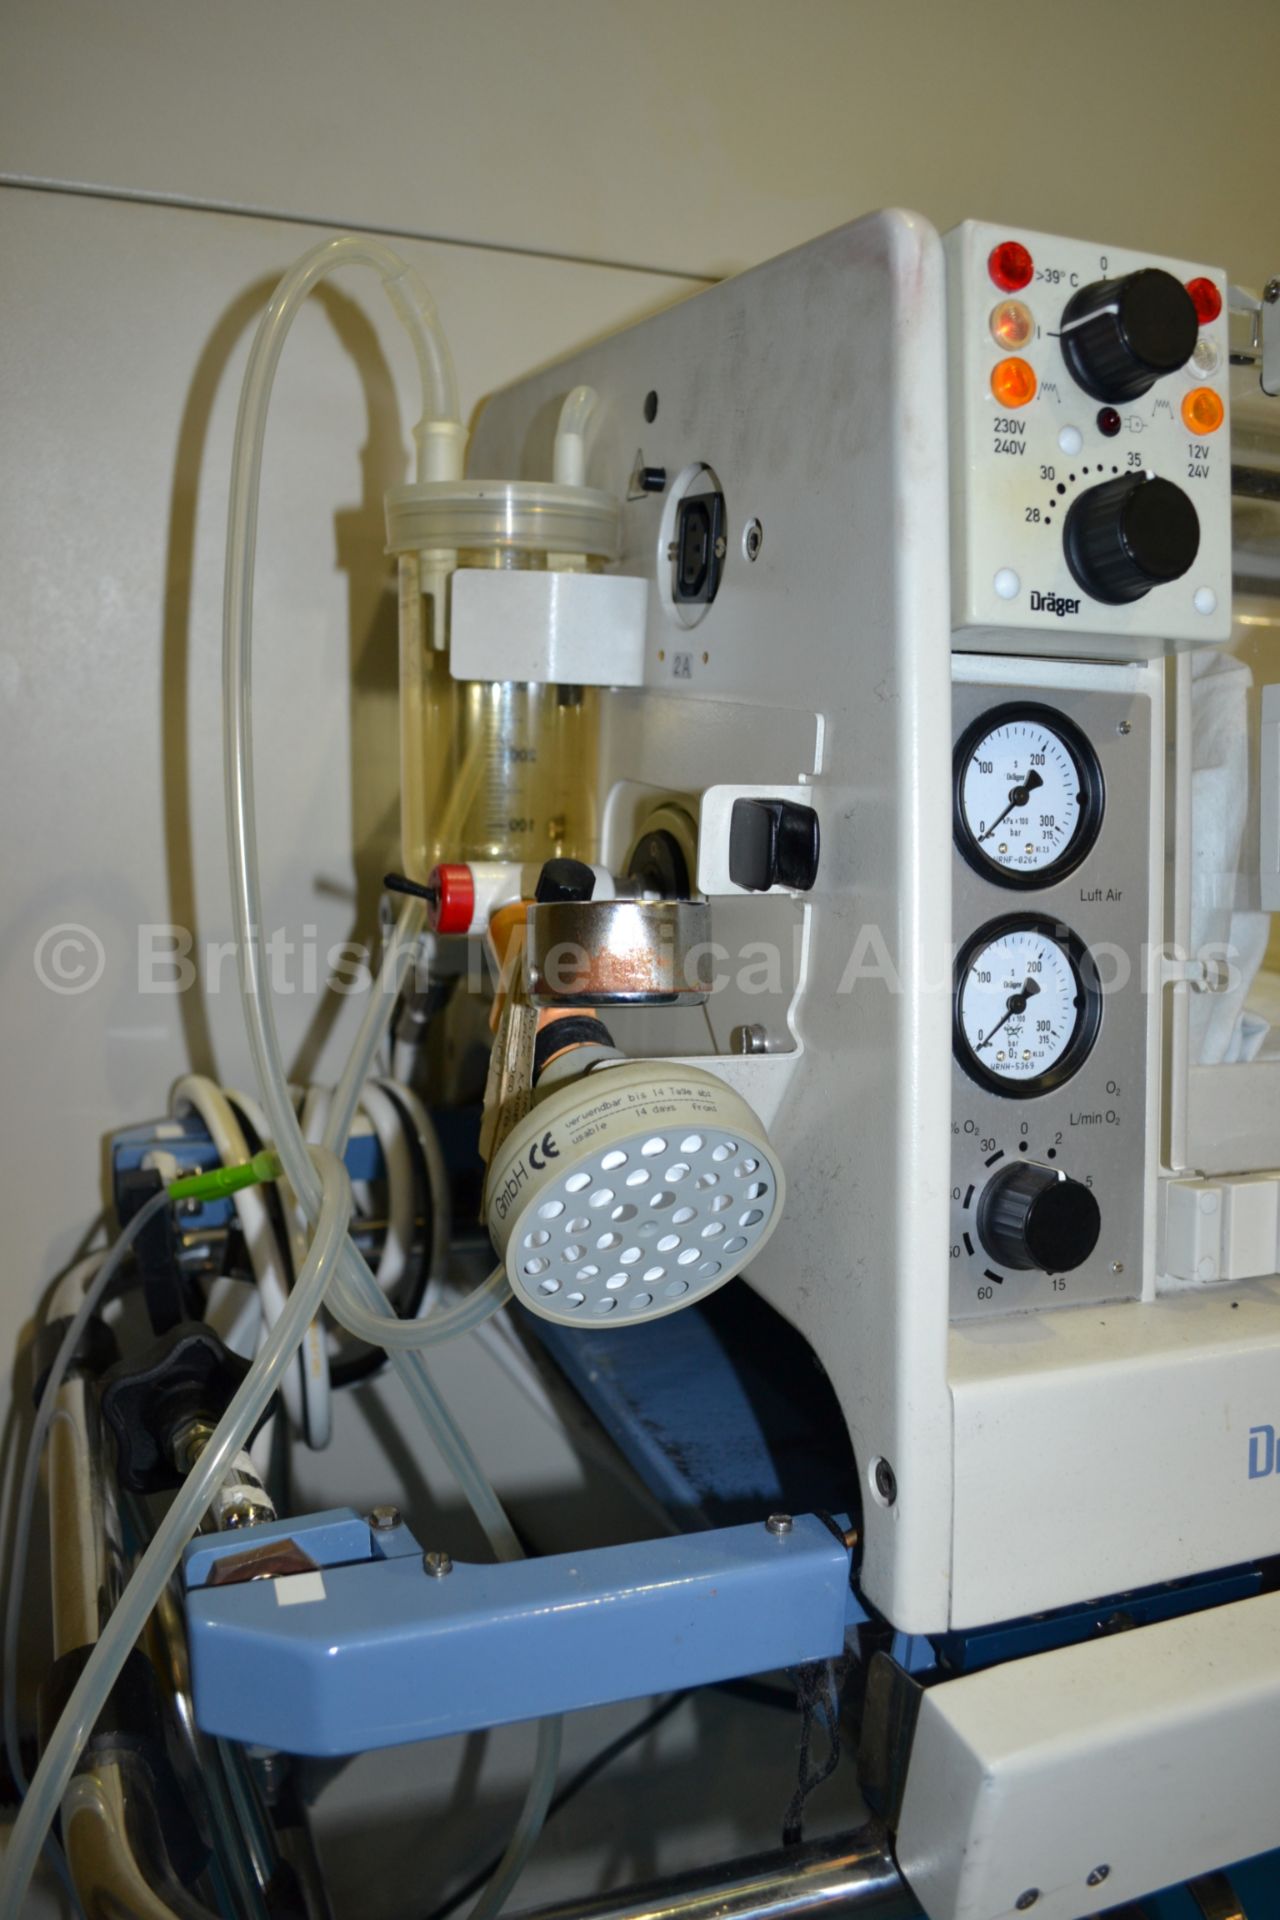 Drager Transport Incubator 5400 with Drager Babylo - Image 3 of 4